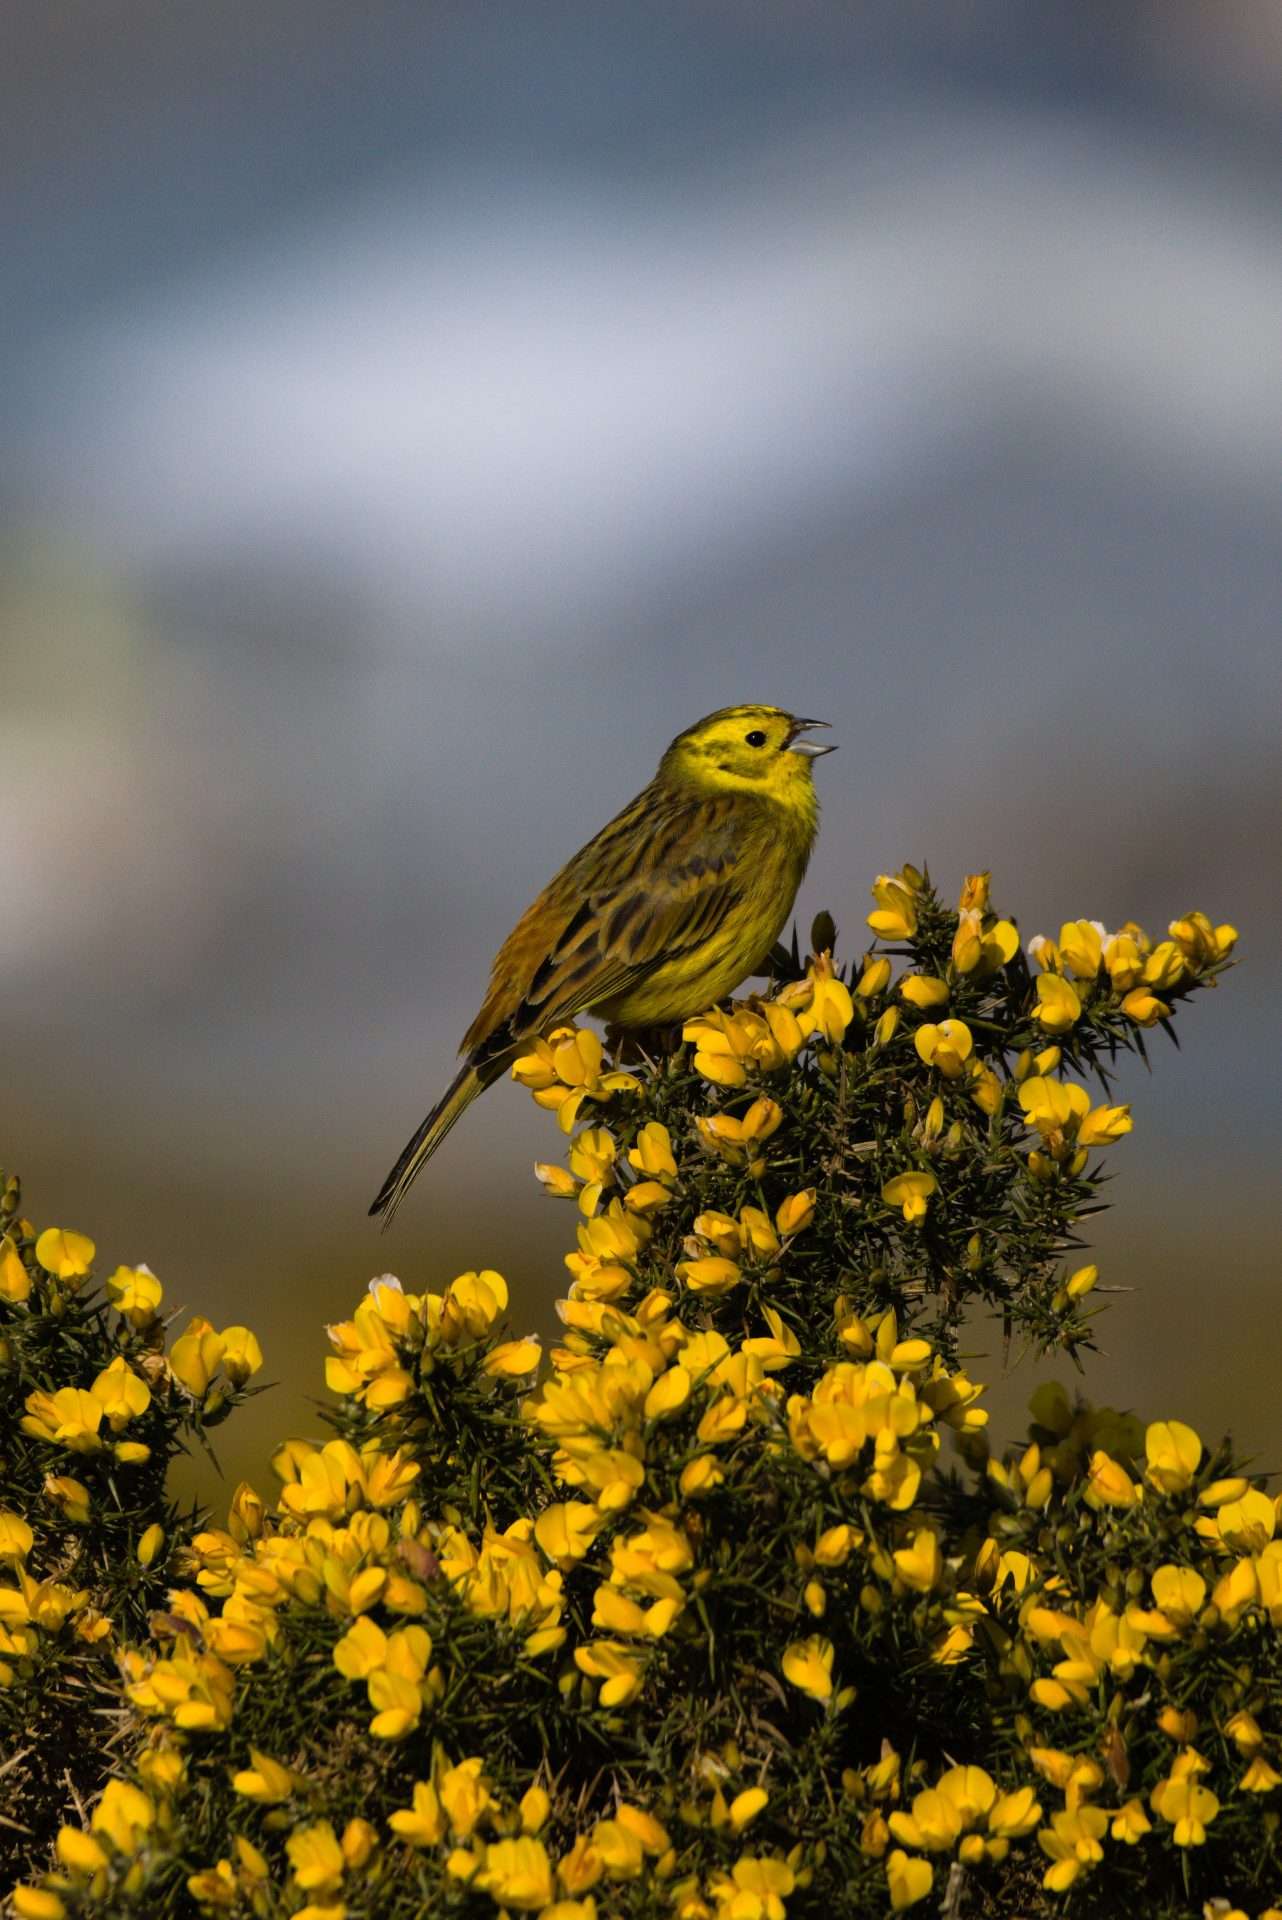 Yellowhammer by Annabel Sharpe at Crownhill Down